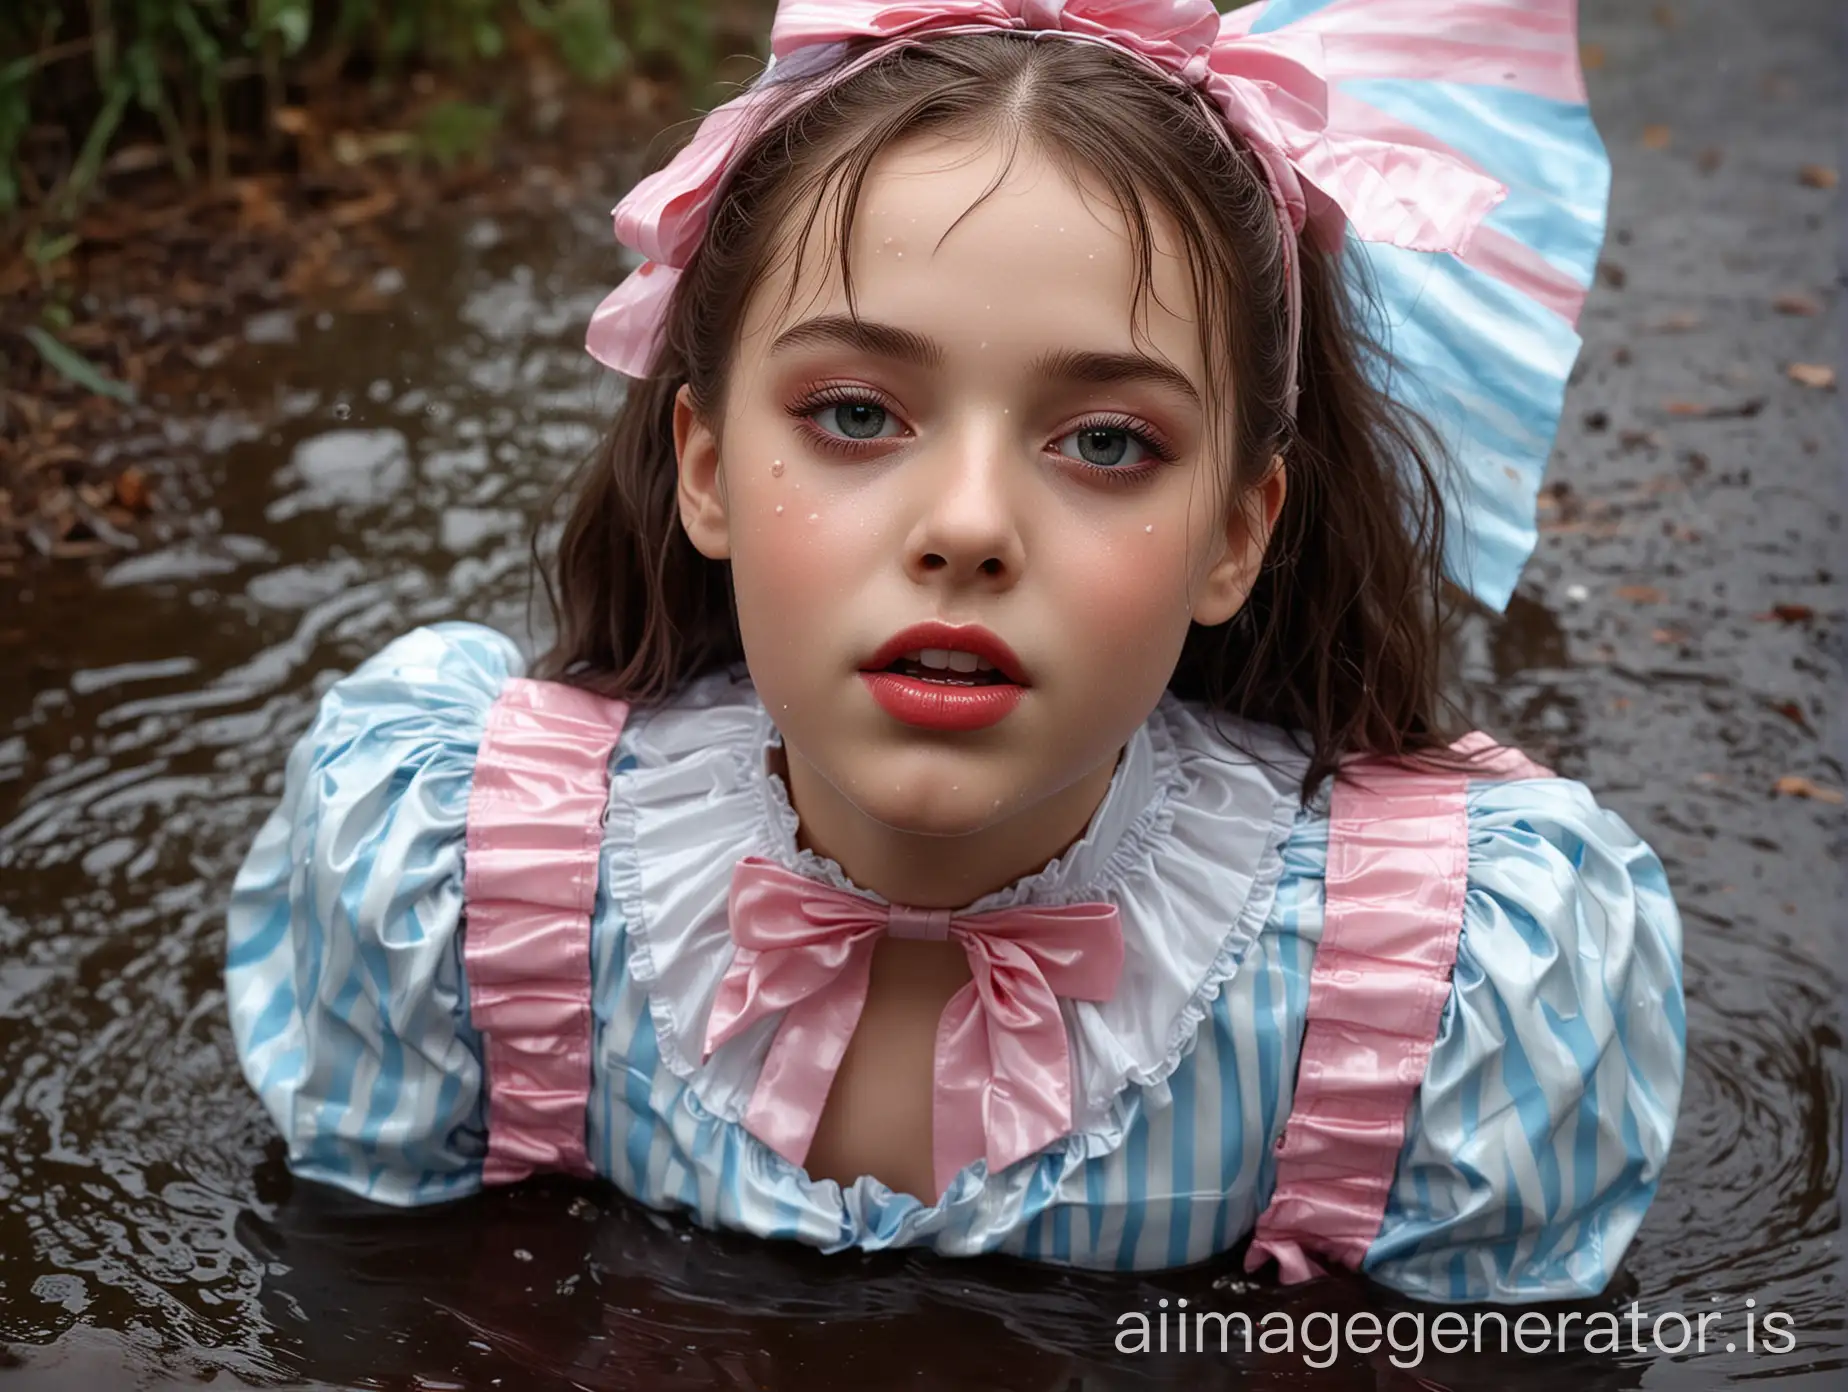 hyperrealistic image. highest quality. 10 year old french girl. she is extremely skinny. she has extremely white skin. big darkbrown eyes. mouth wide open. lips are extremely shiny by a lot of the shiniest red lipgloss. She is lying in a forest lake in heavy summer rain. face, hair and clothes are totally wet by the water. she is wearing an extremely shiny latex sweet lolita outfit. collared and totally closed up. the outfit is striped in fine lined lightblue and pink stripes. shiny satin ribbon over the collar and in the hair. over the dress she wears a shiny latex pinafore. shiny pantyhose. shiny pink patent leather shoes. 